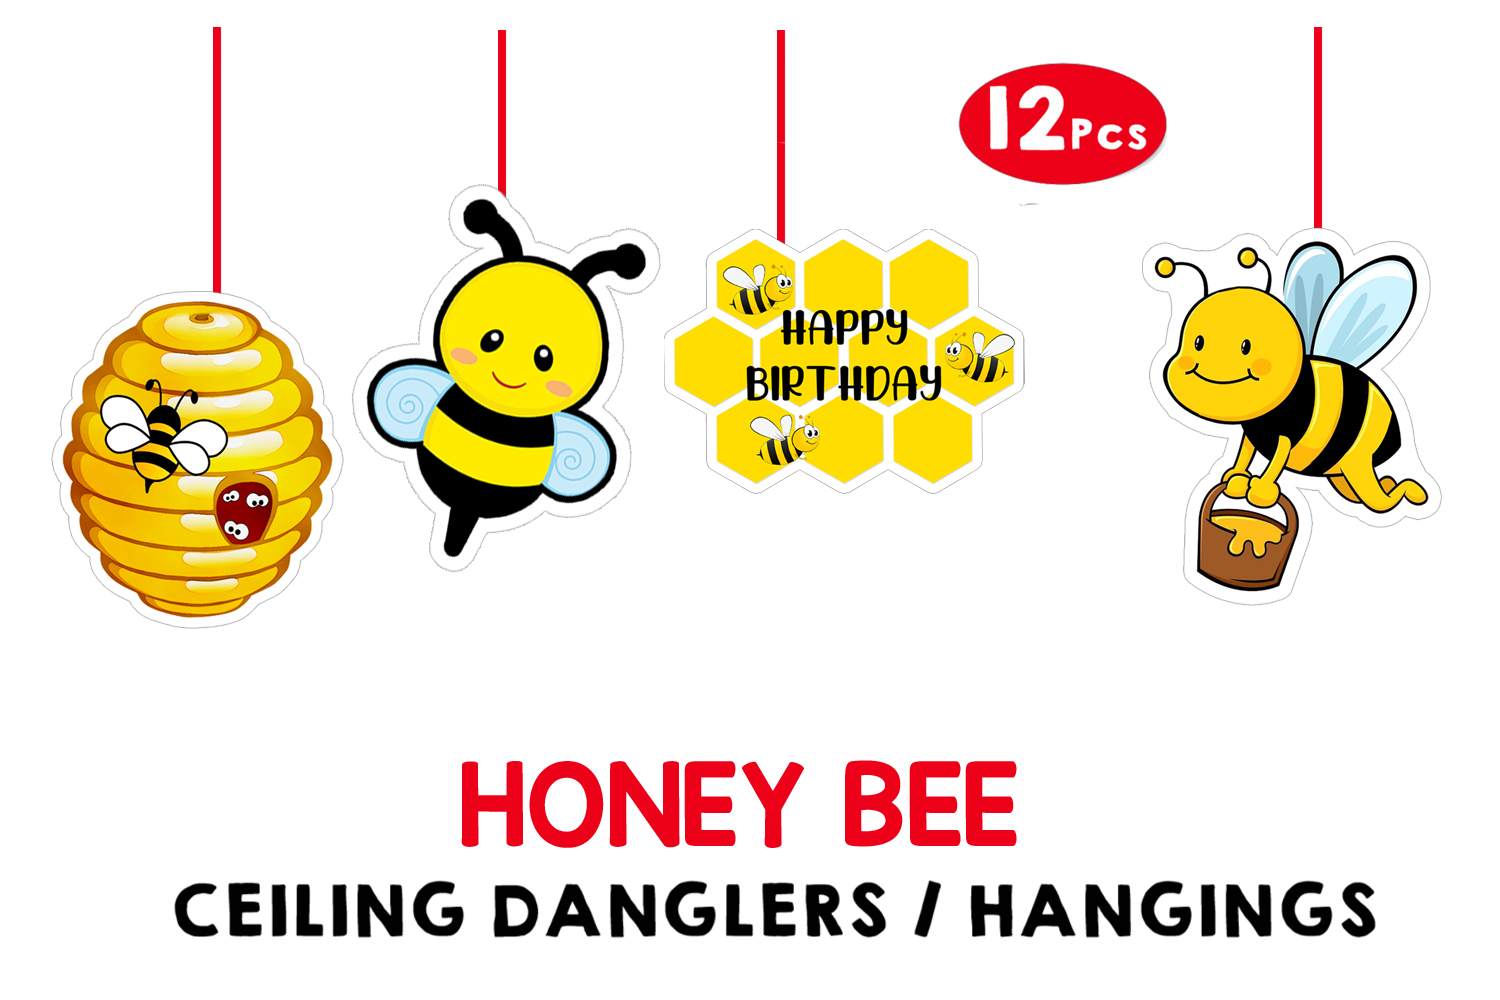 Honey Bee Theme Hangings / Danglers #2 (12 Pcs)(non-cutomised)